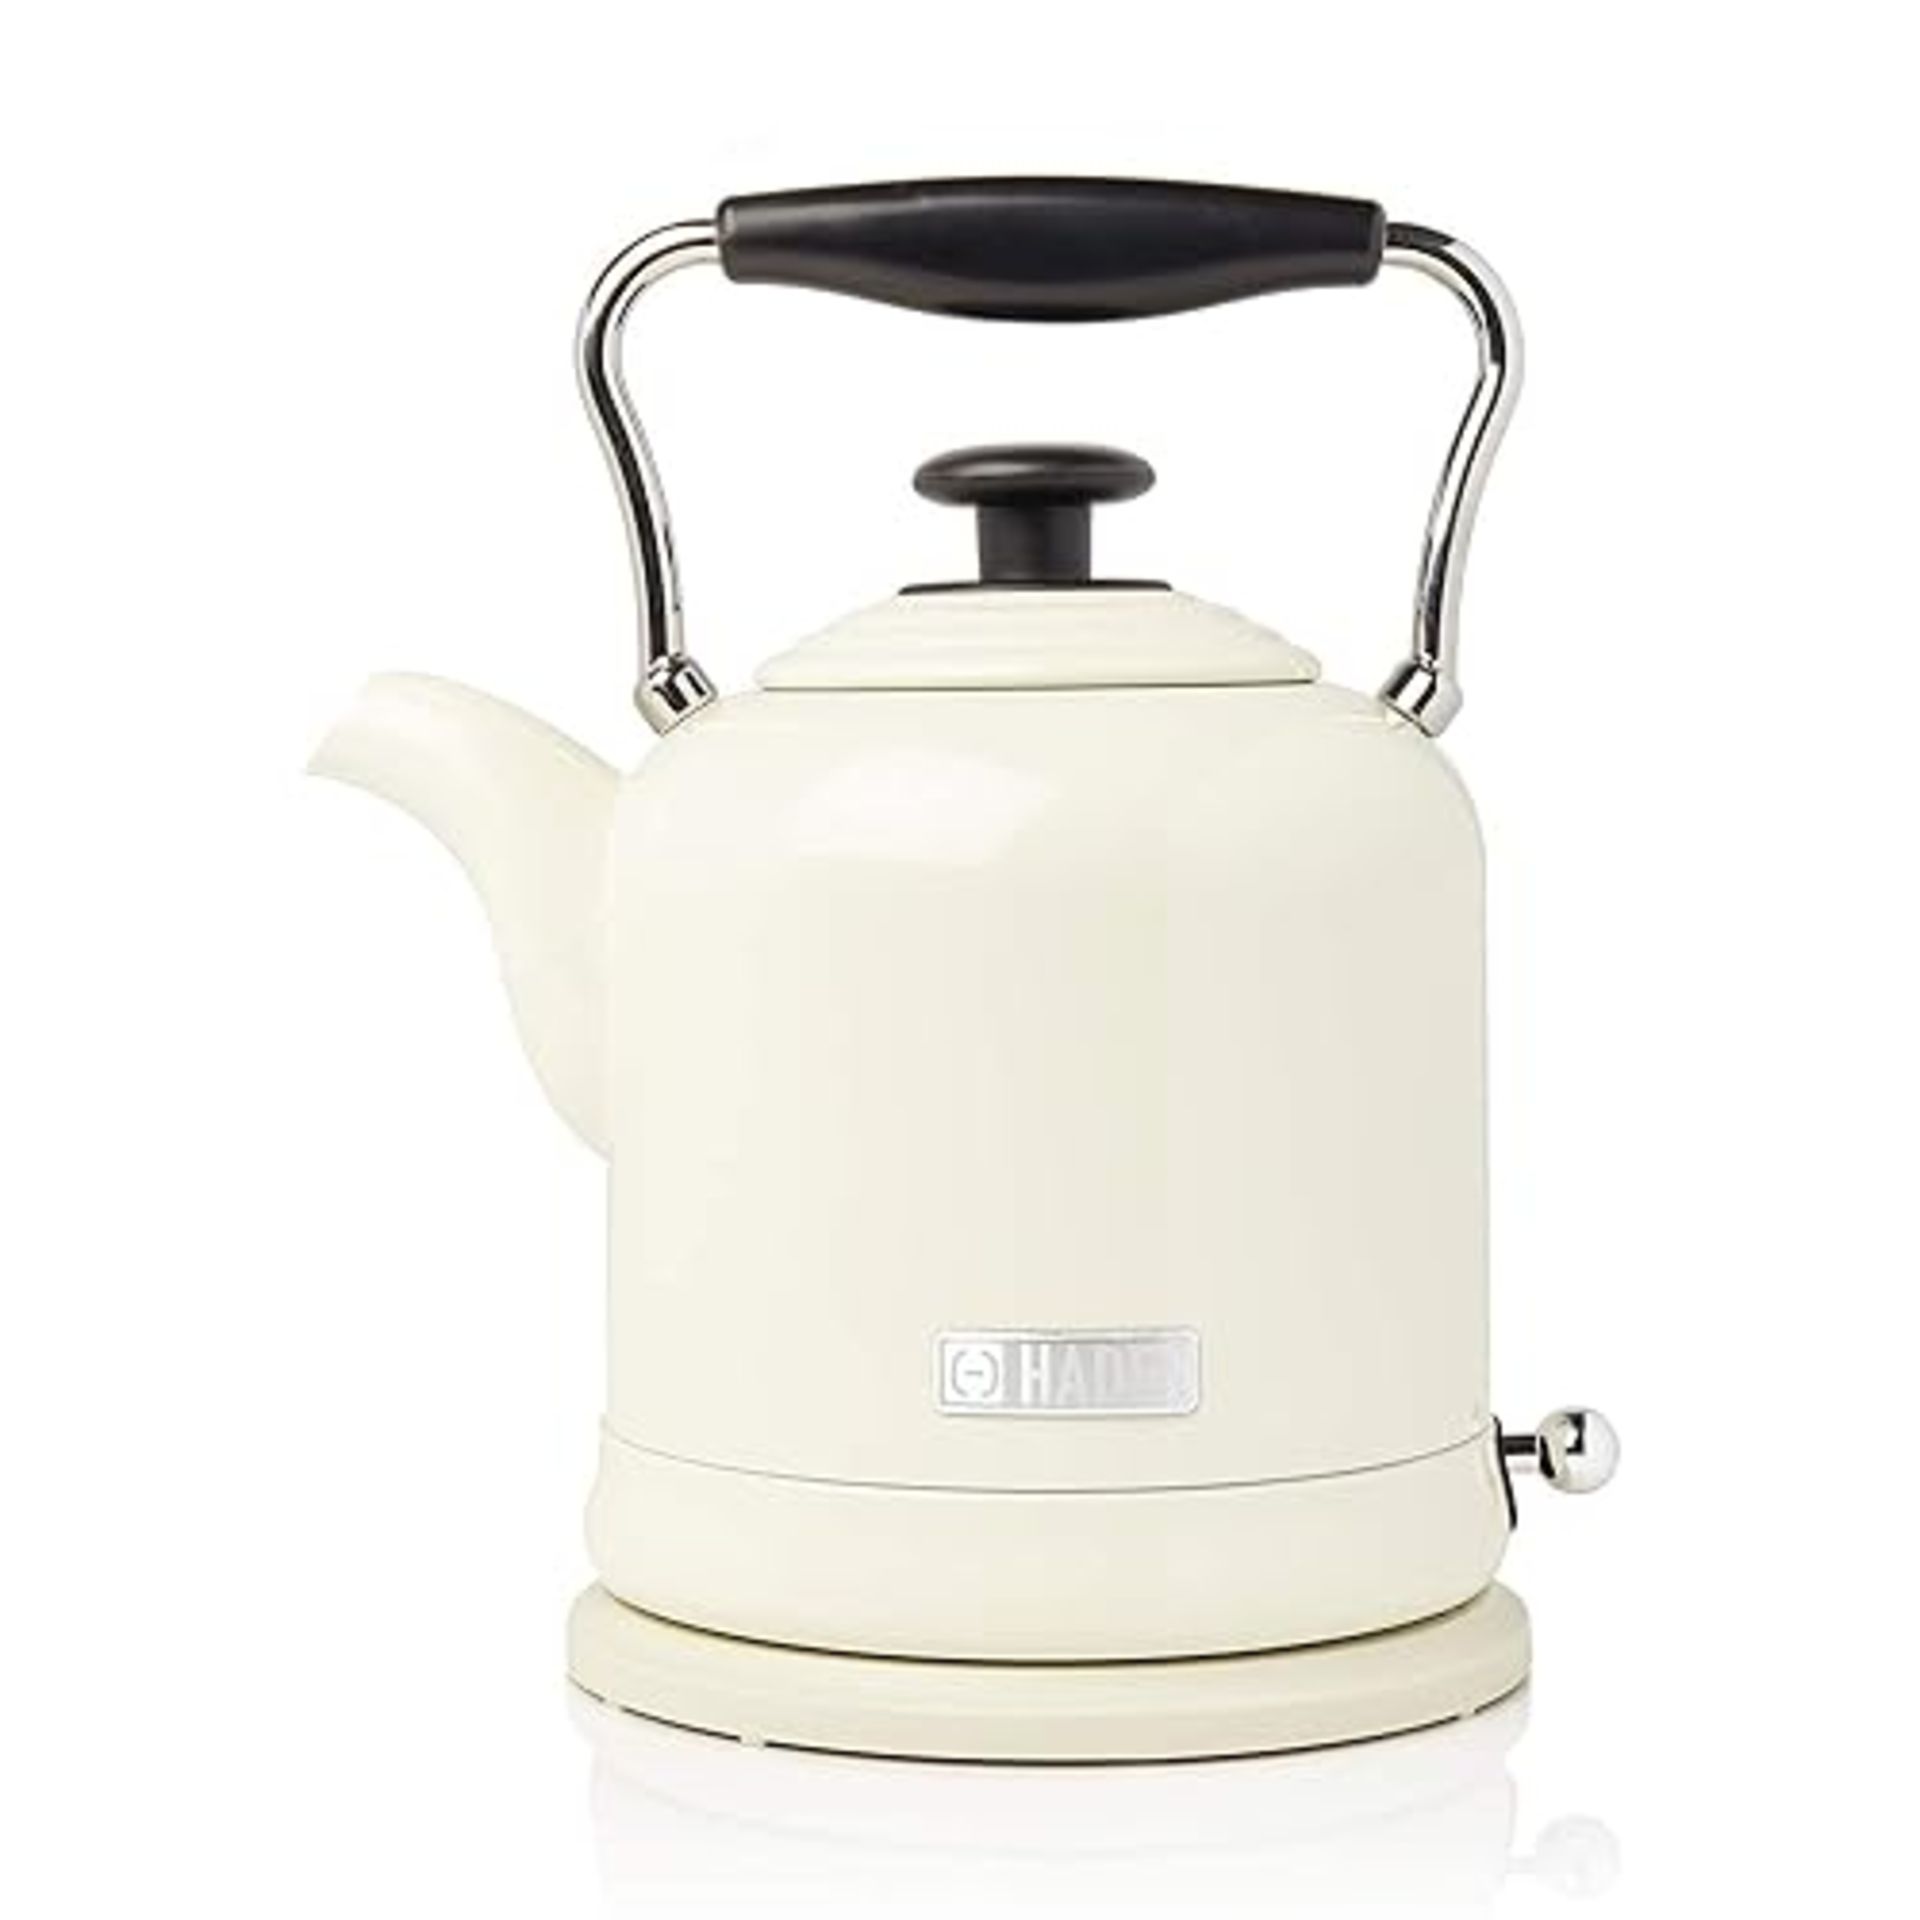 Haden Highclere Cream Kettle - 3000W Fast Boil Stainless Steel Kettle, Cordless, 360 Base, Cup Mark